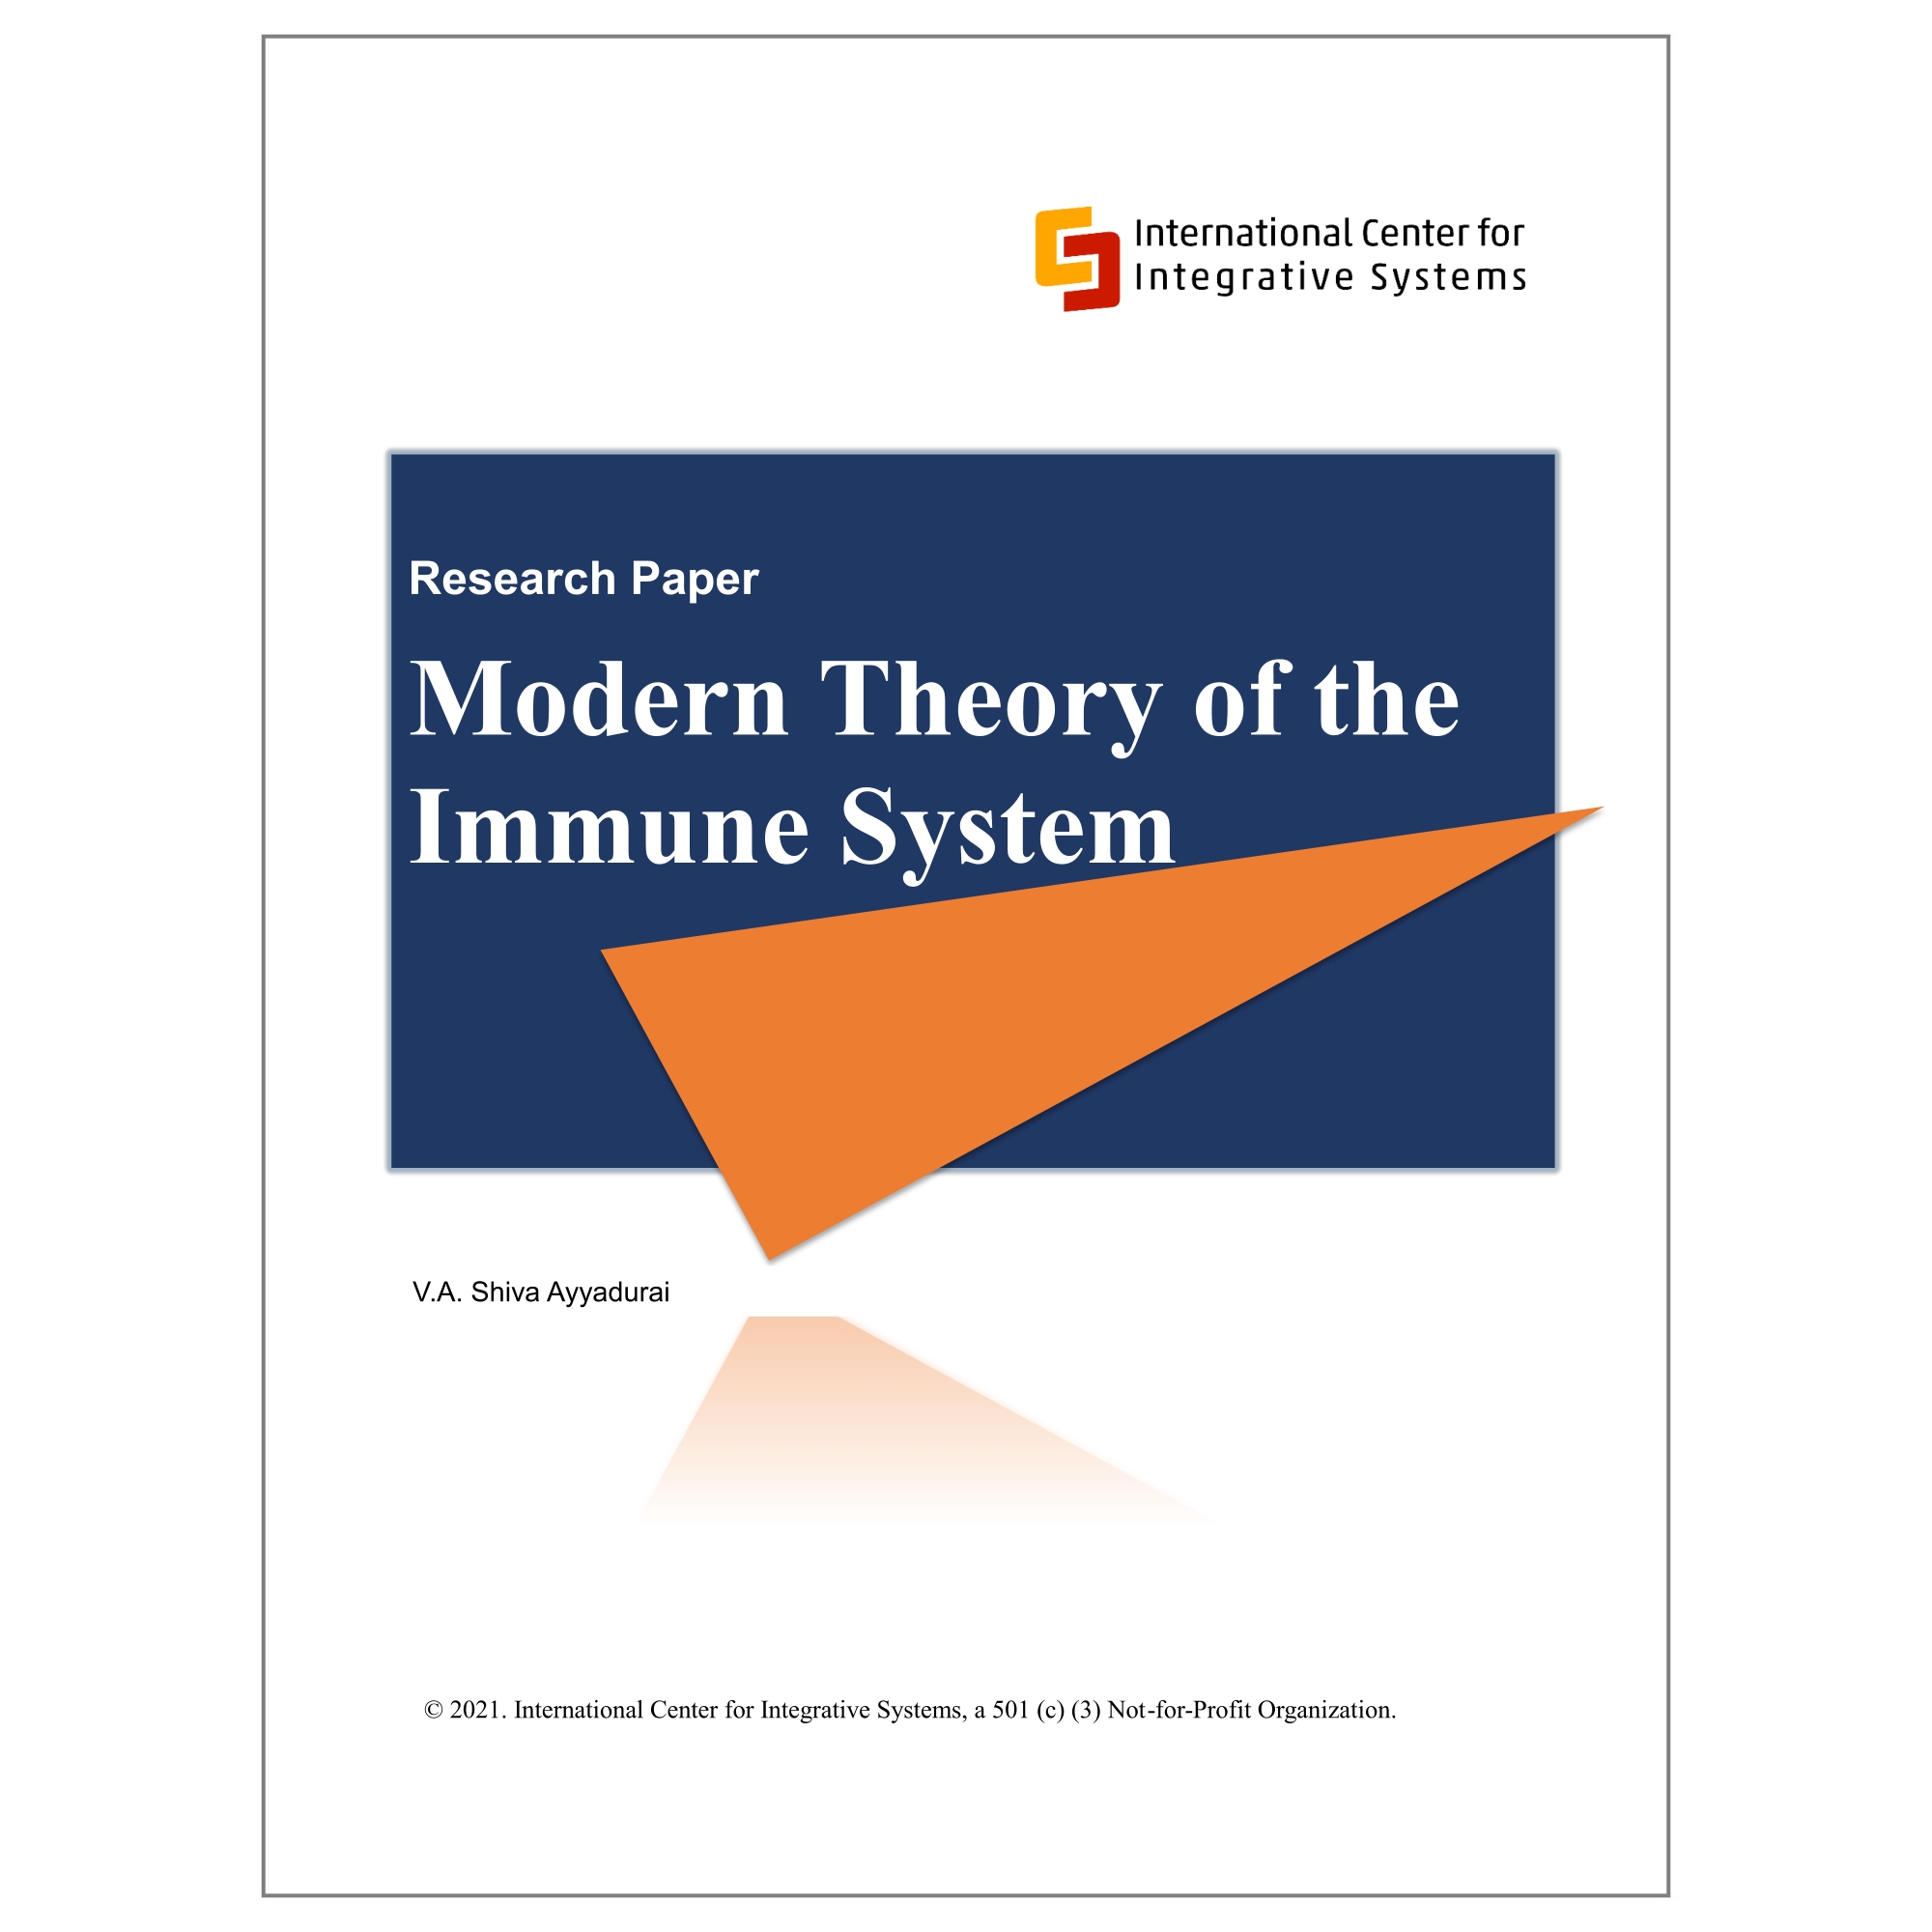 Modern Theory of the Immune System